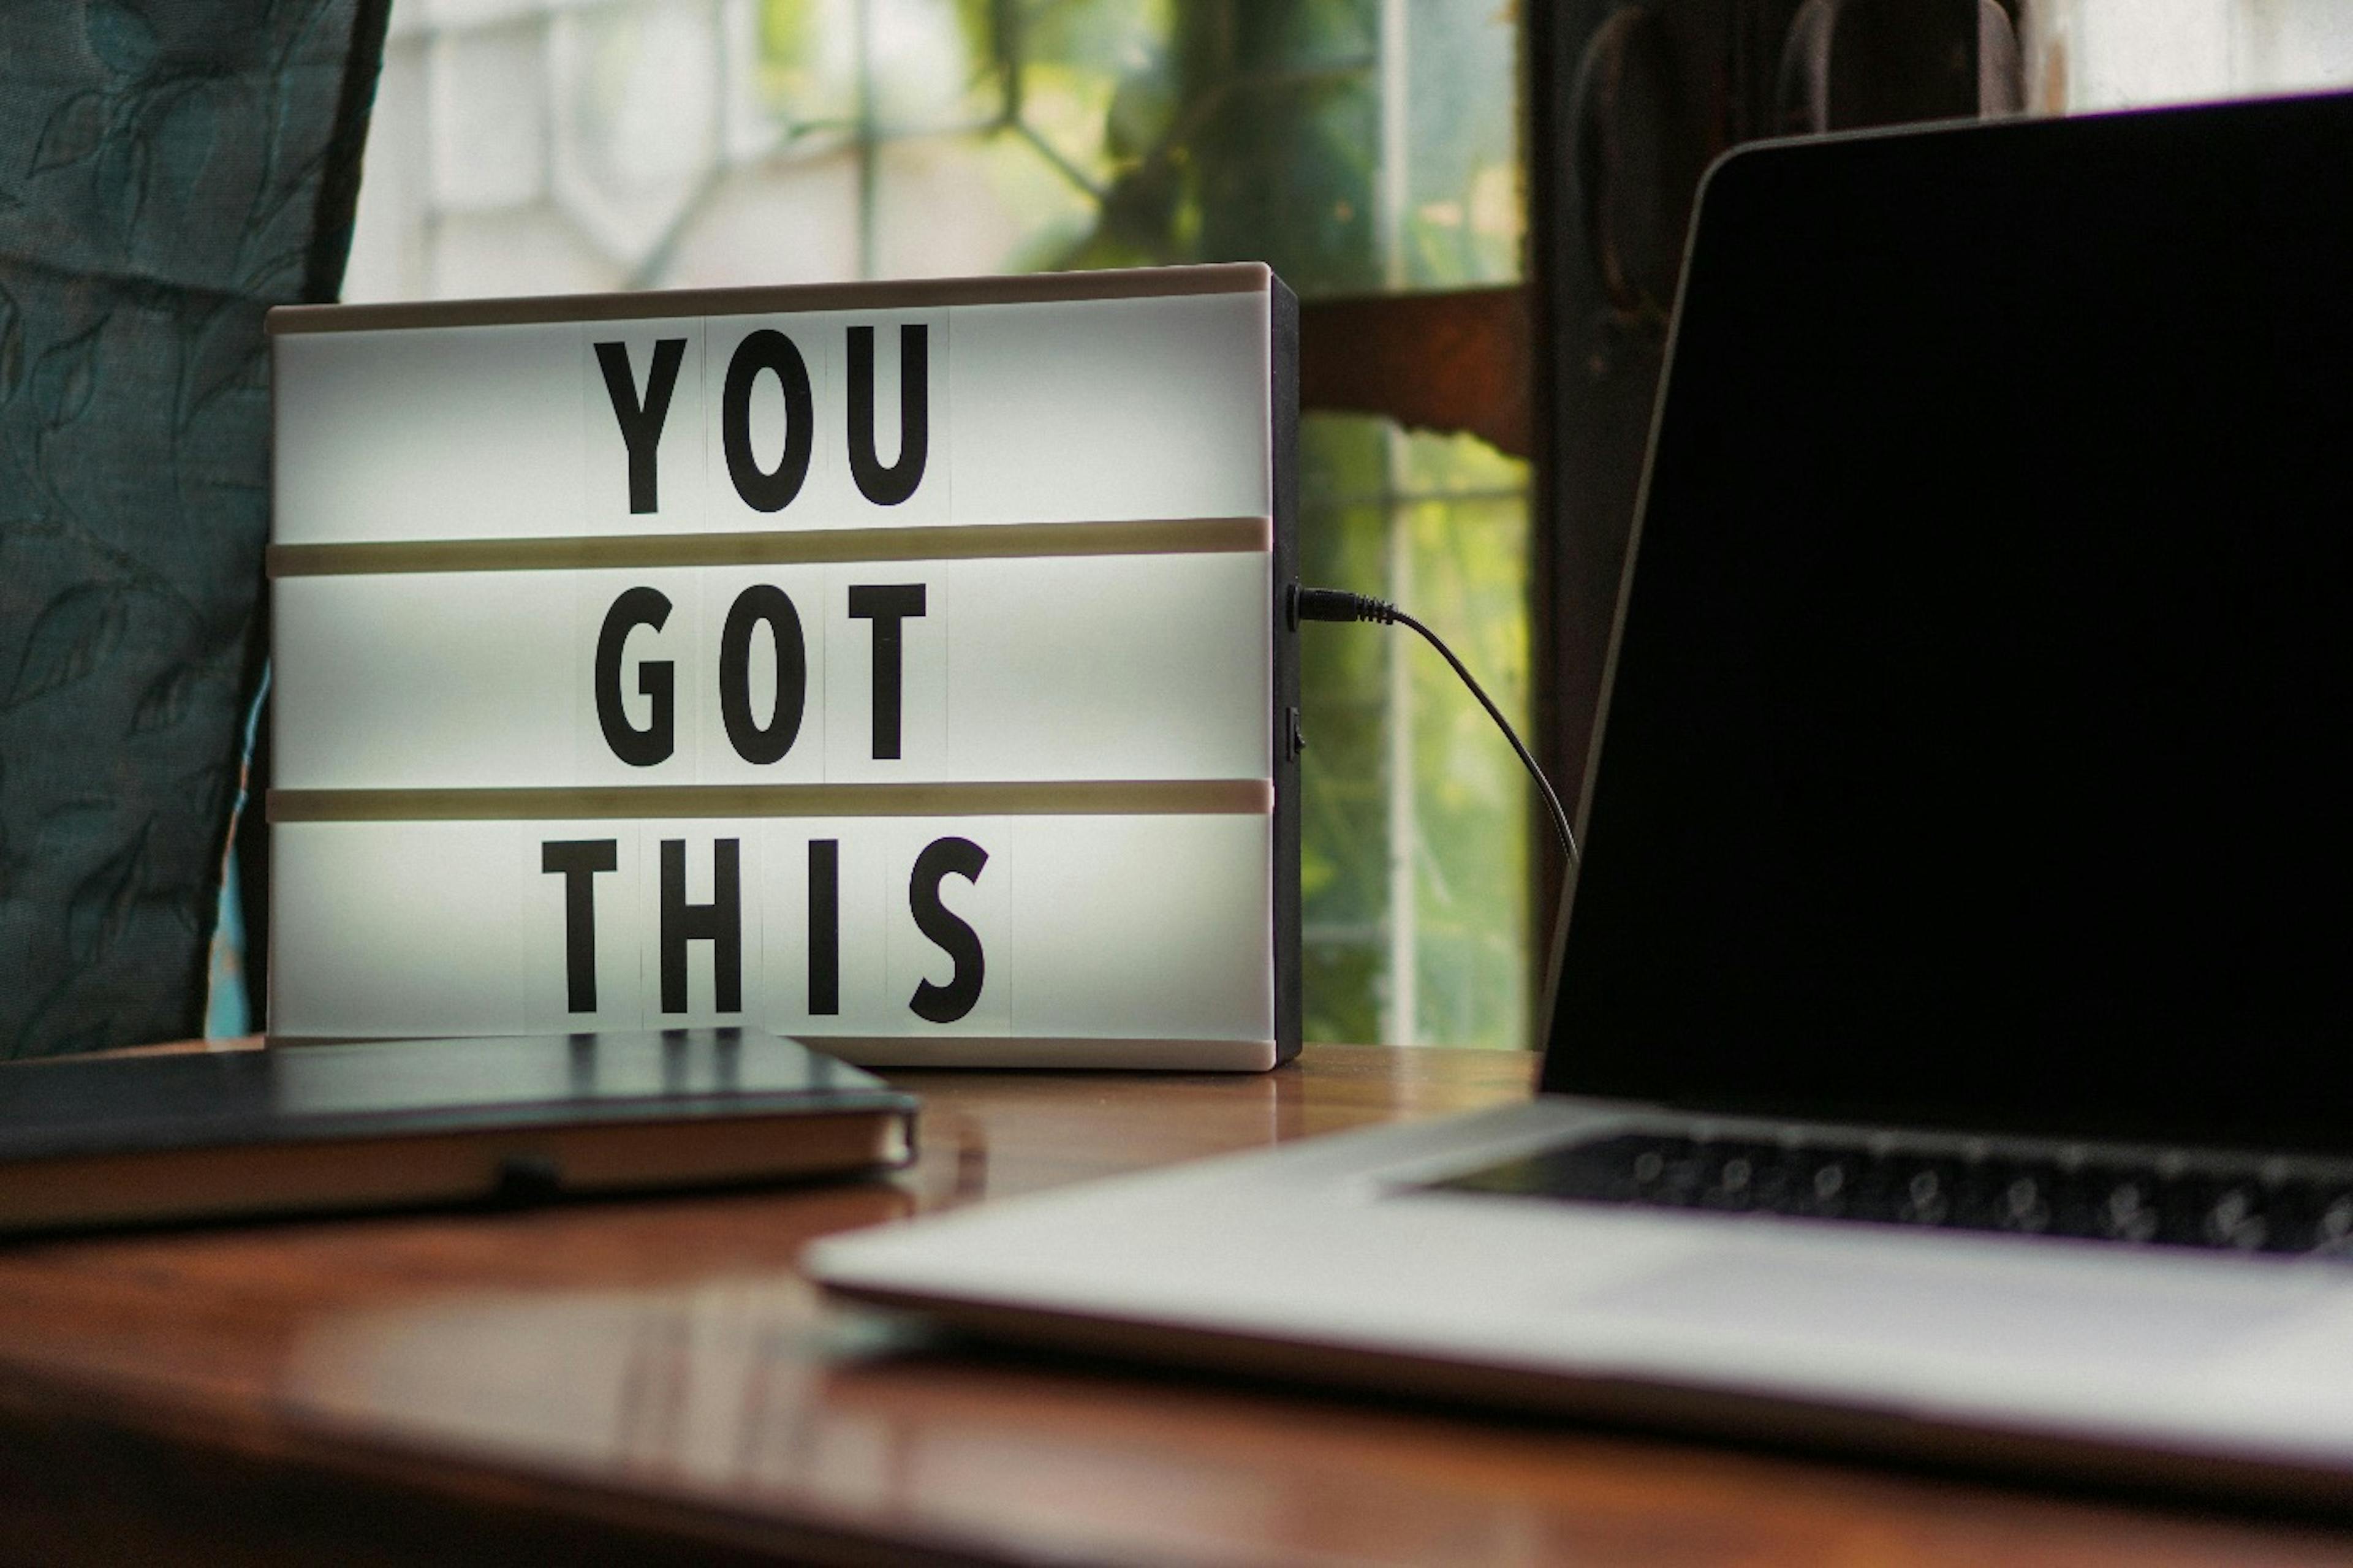 A laptop, notebook and a sign on the table. Sign says "You got this".